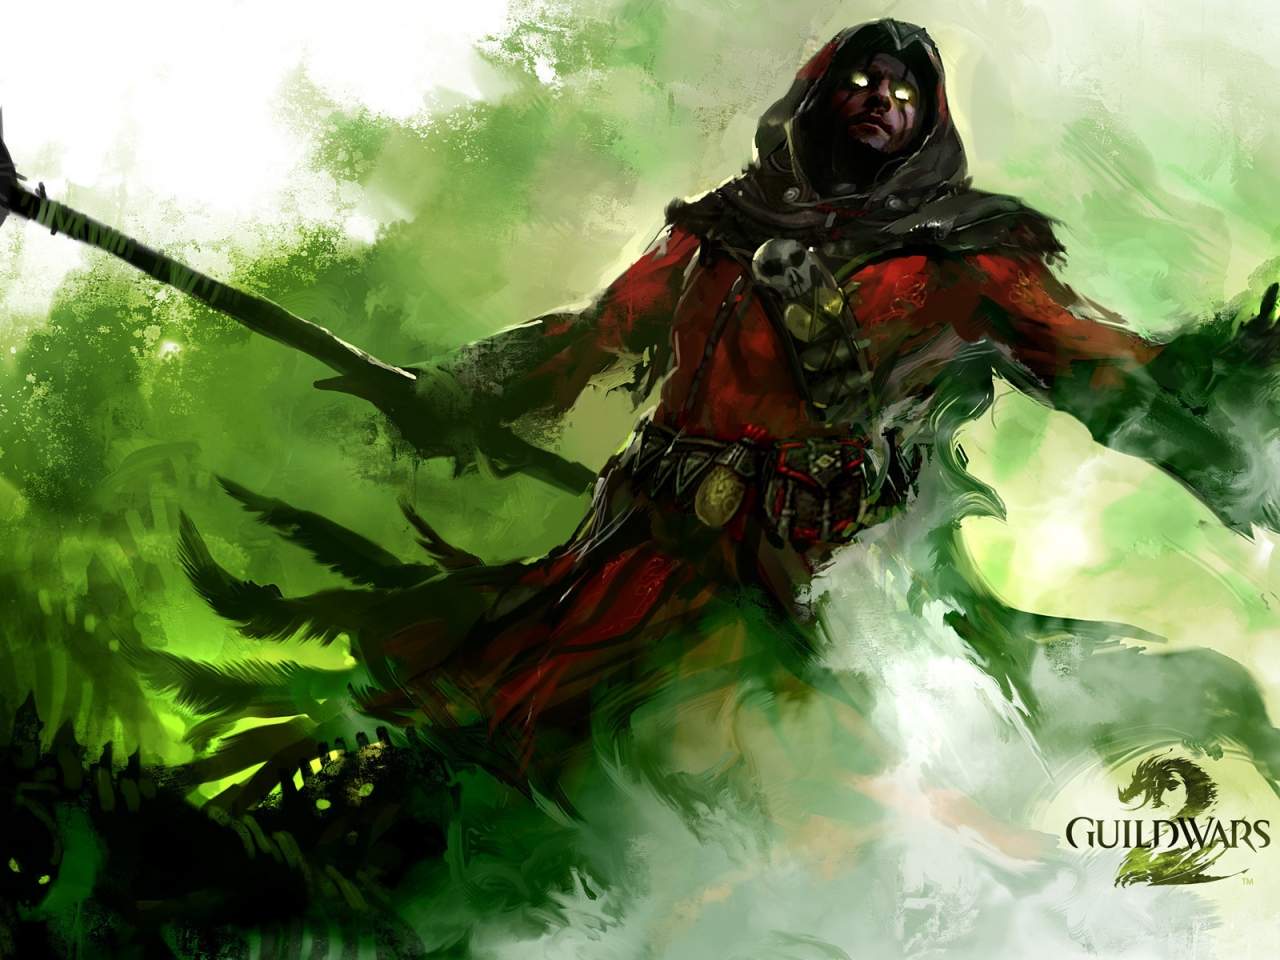 Great Guild Wars 2 for 1280 x 960 resolution